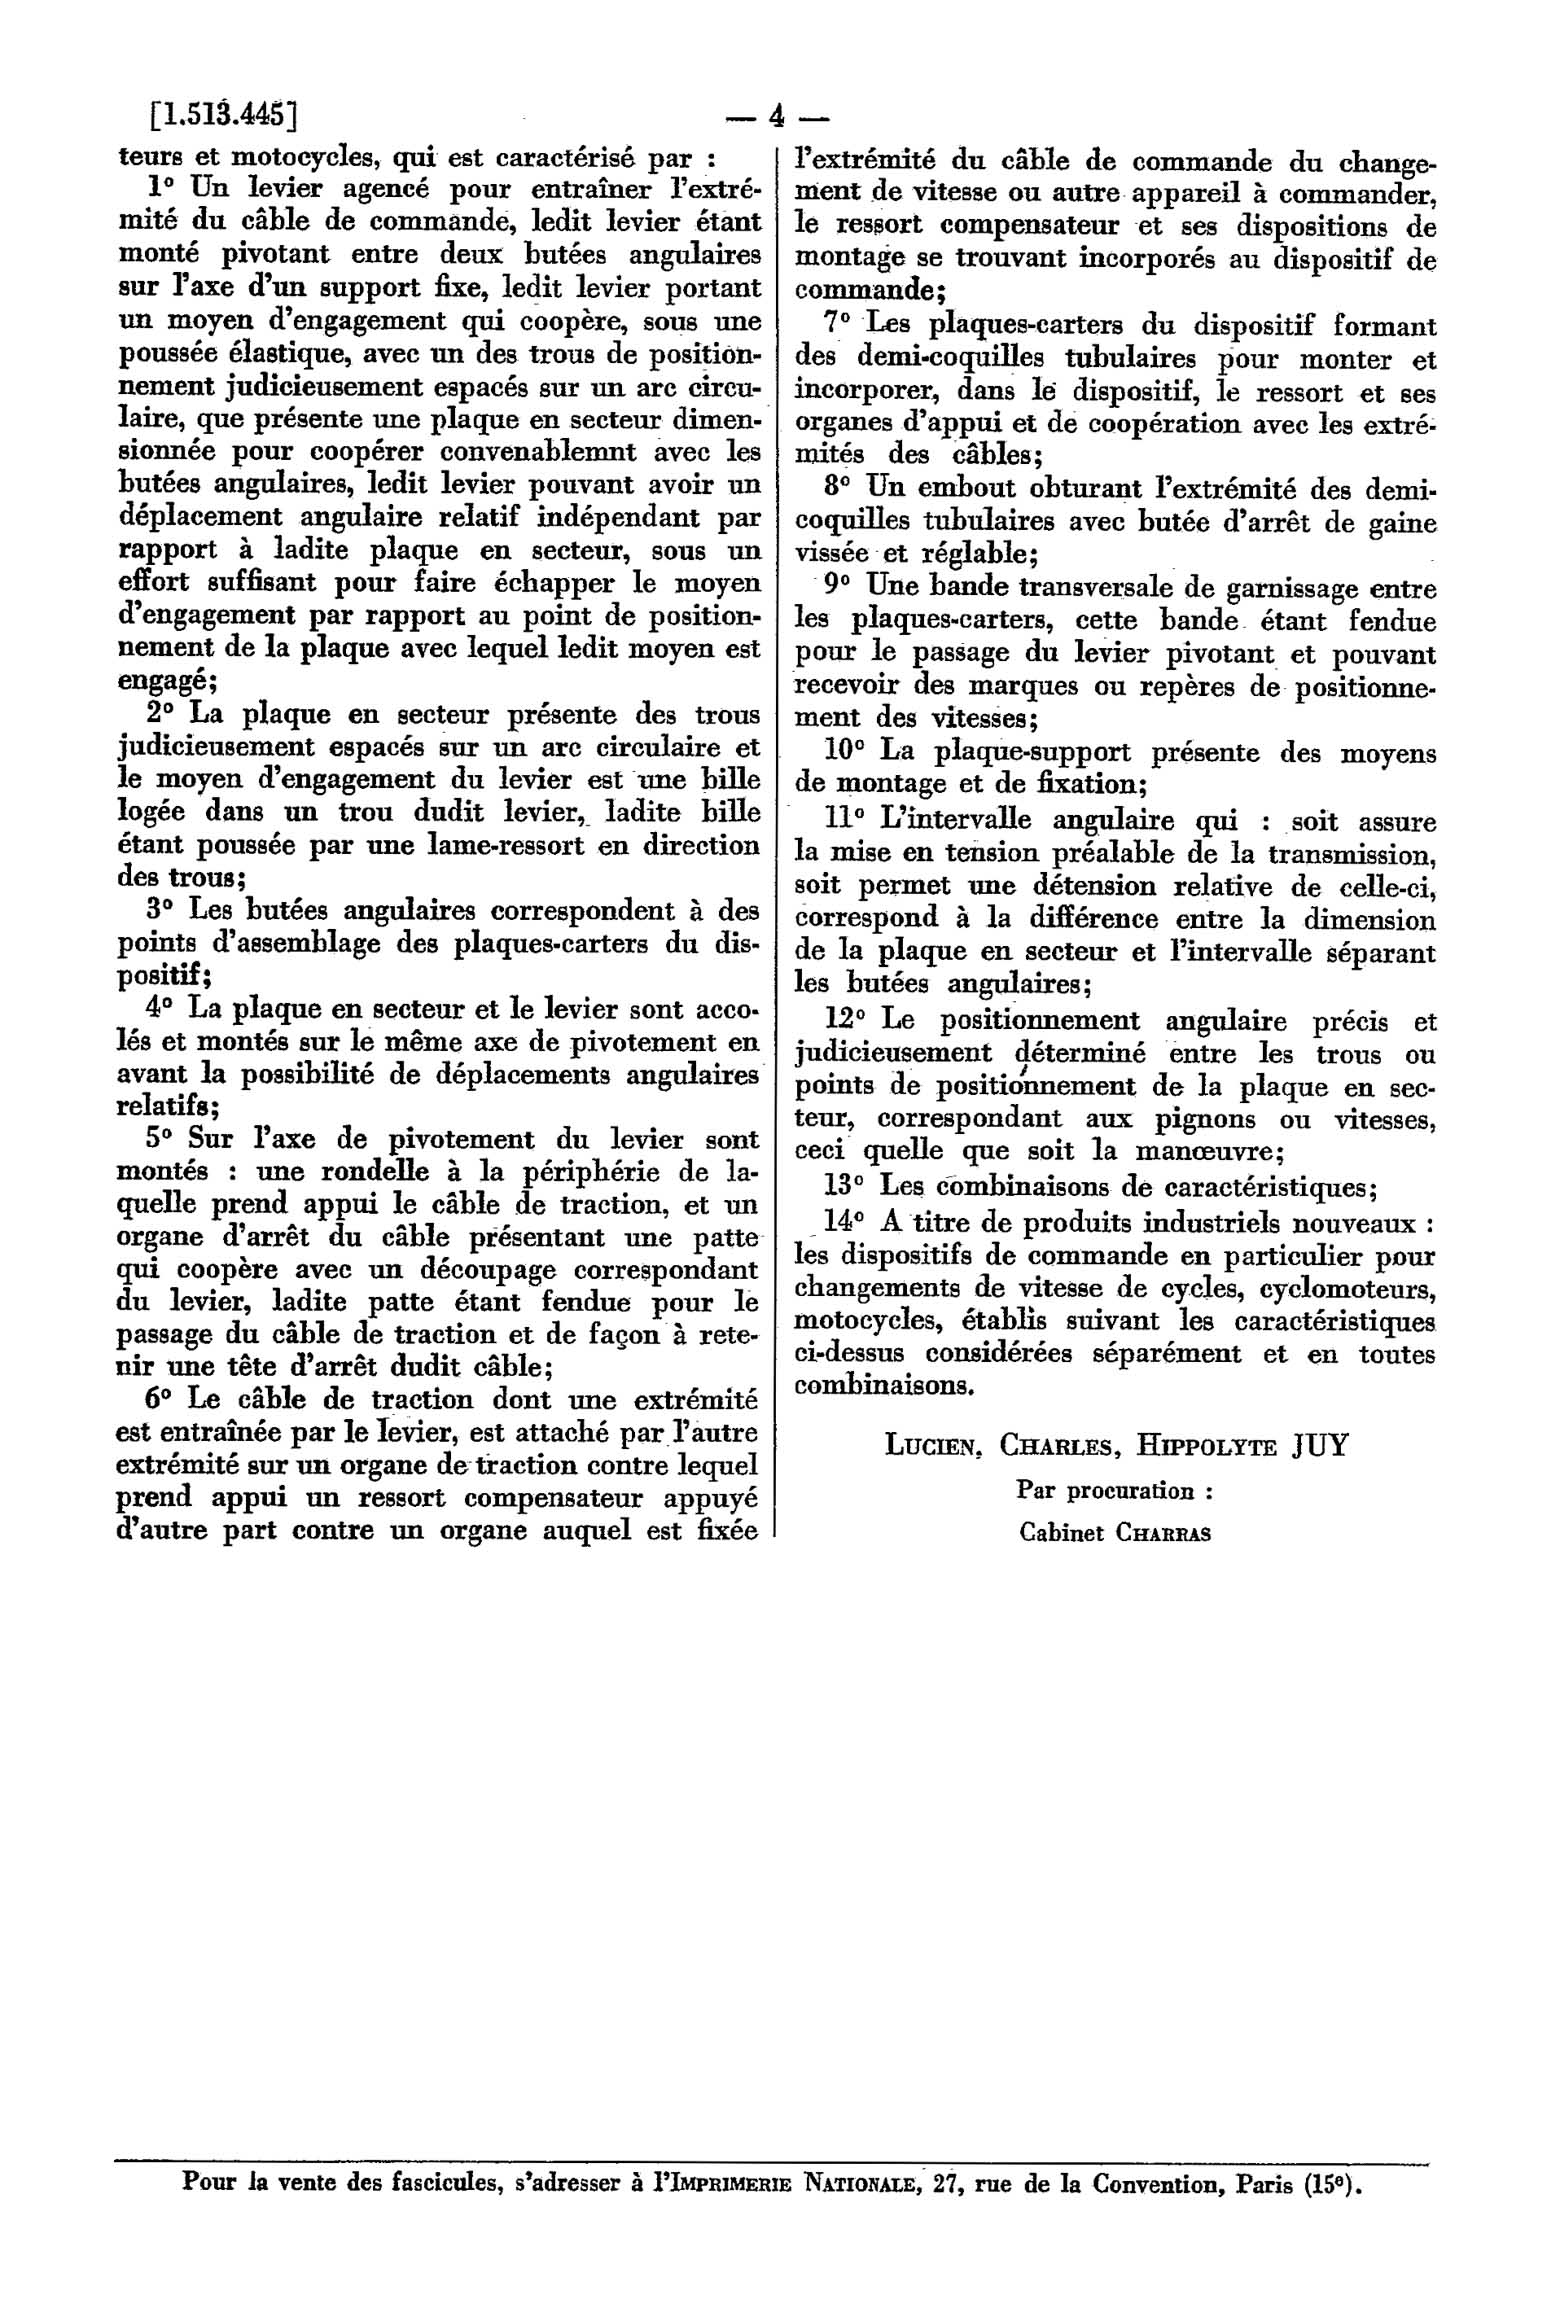 French Patent 1,513,445 - Simplex scan 004 main image